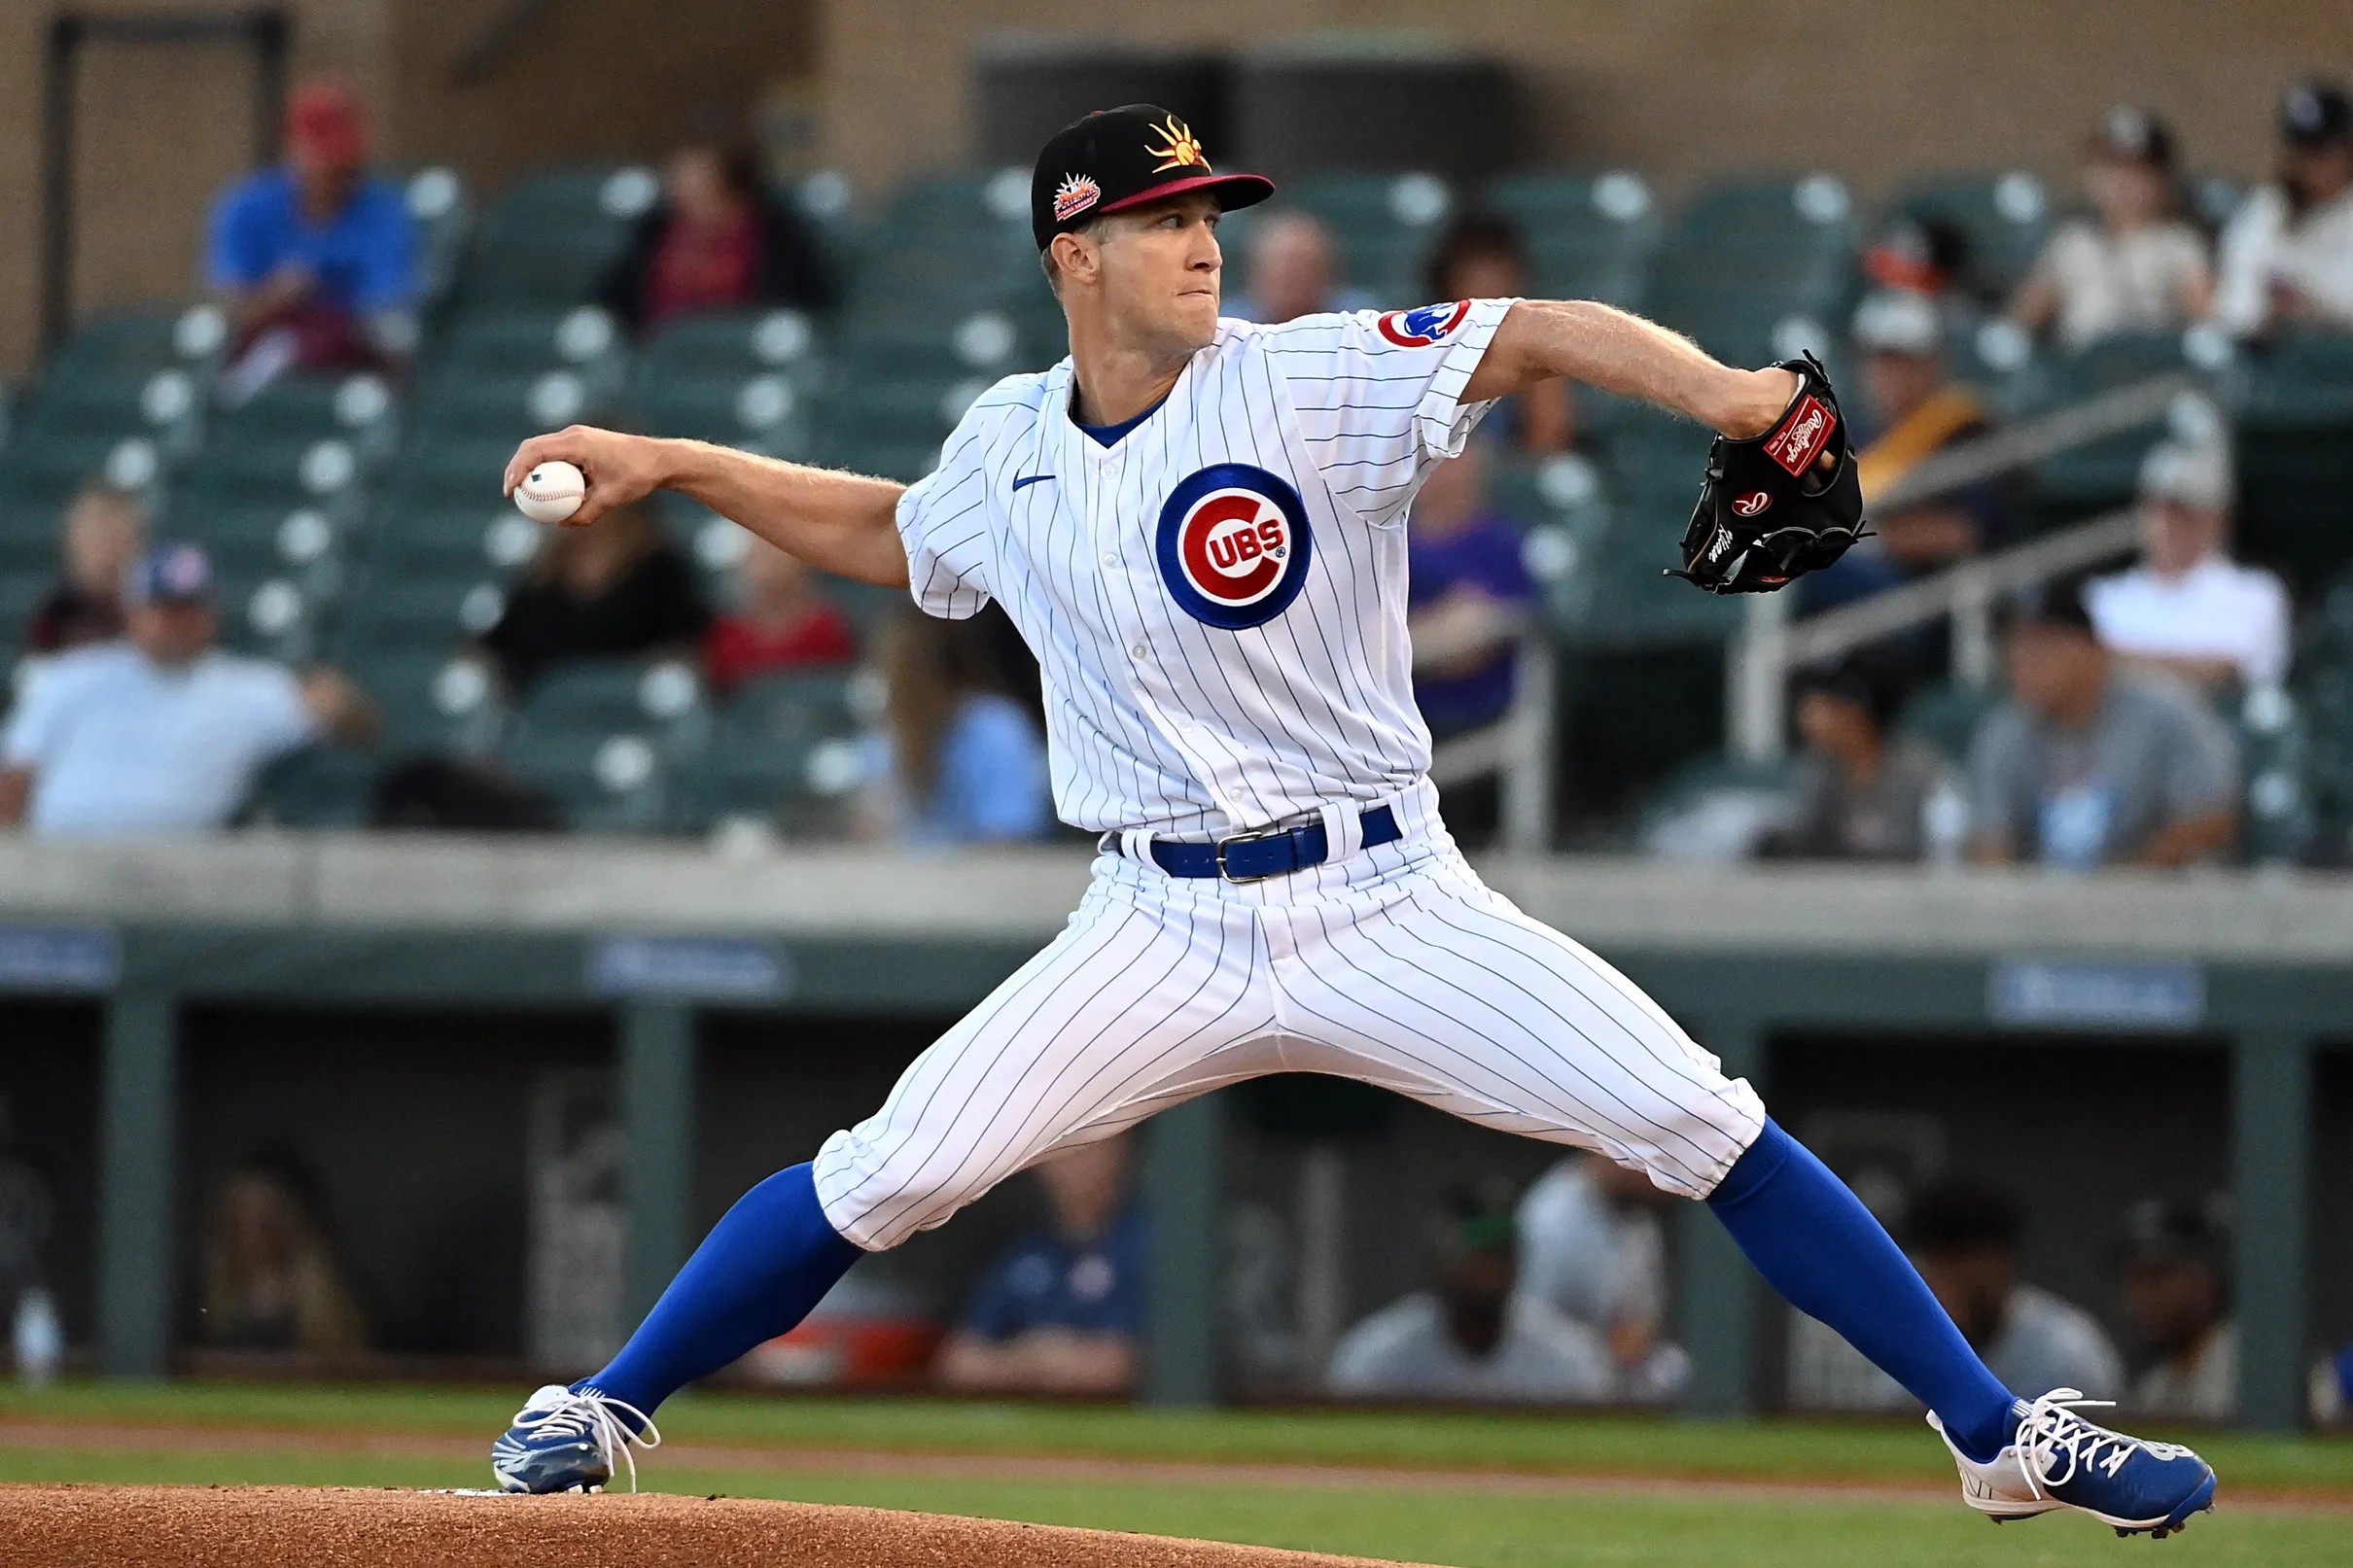 Cubs minors: Get to know the Iowa Cubs Brennen Davis - Bleed Cubbie Blue